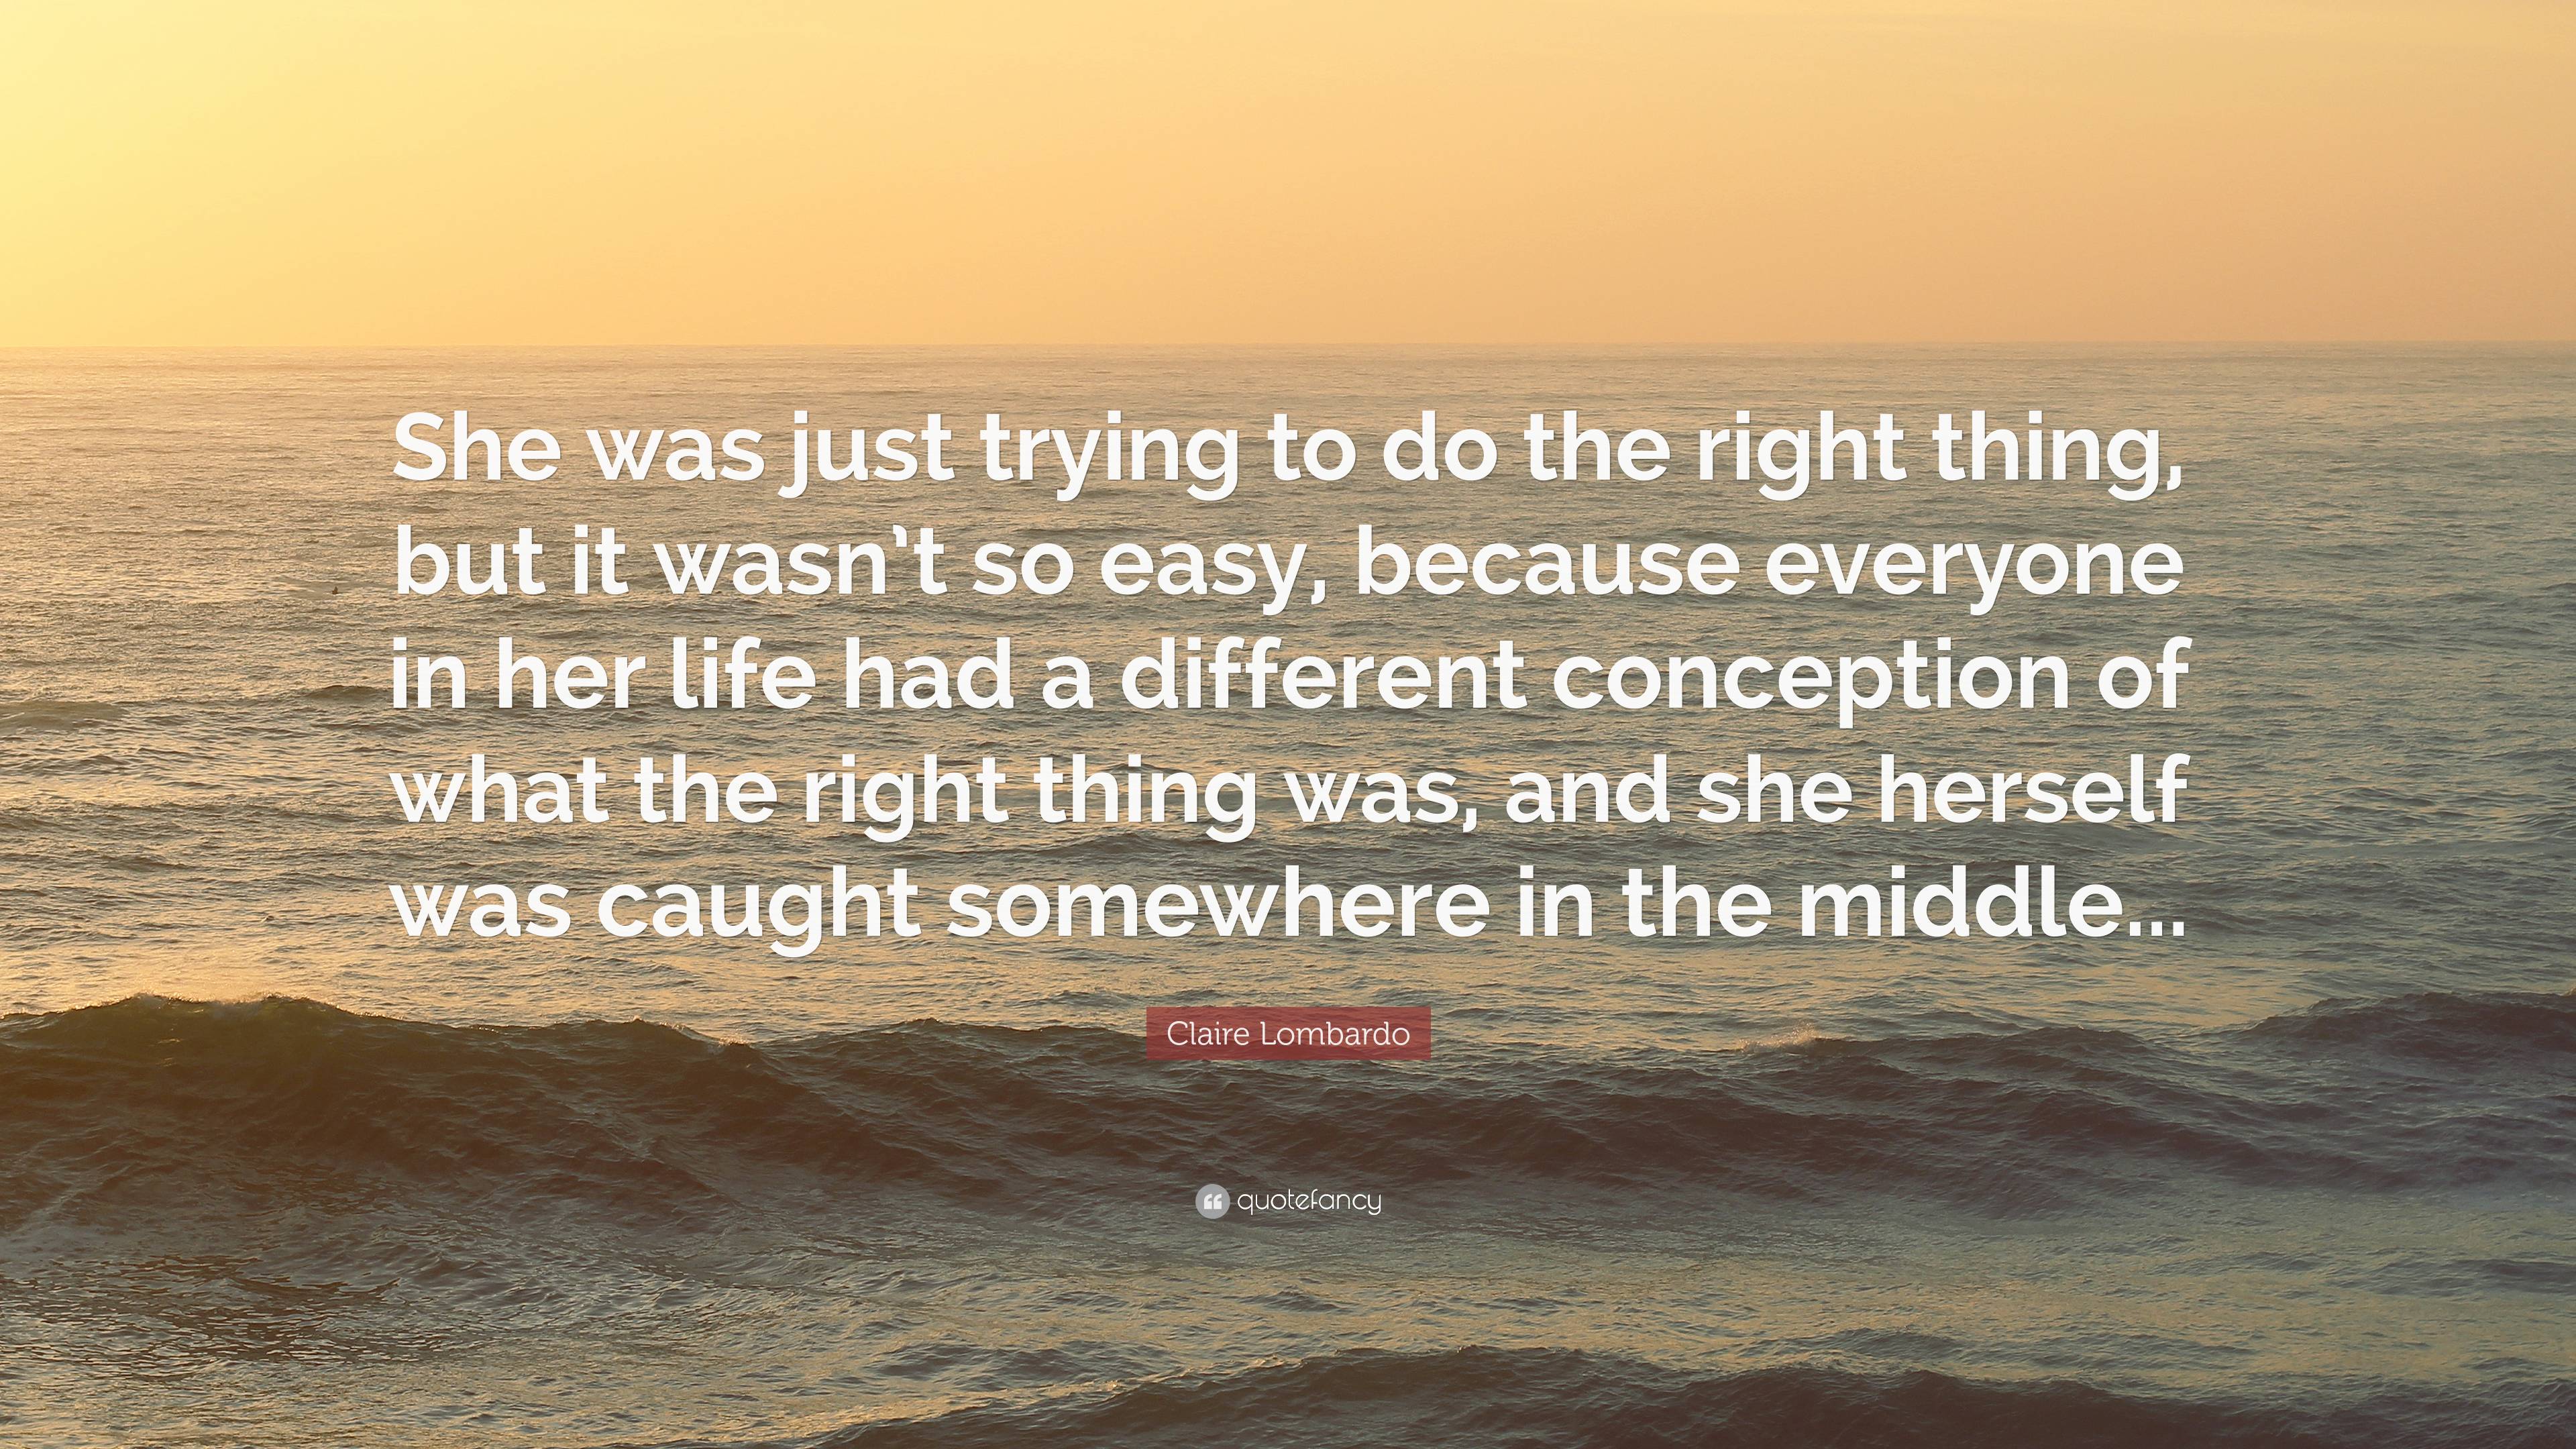 Claire Lombardo Quote: “She was just trying to do the right thing, but ...